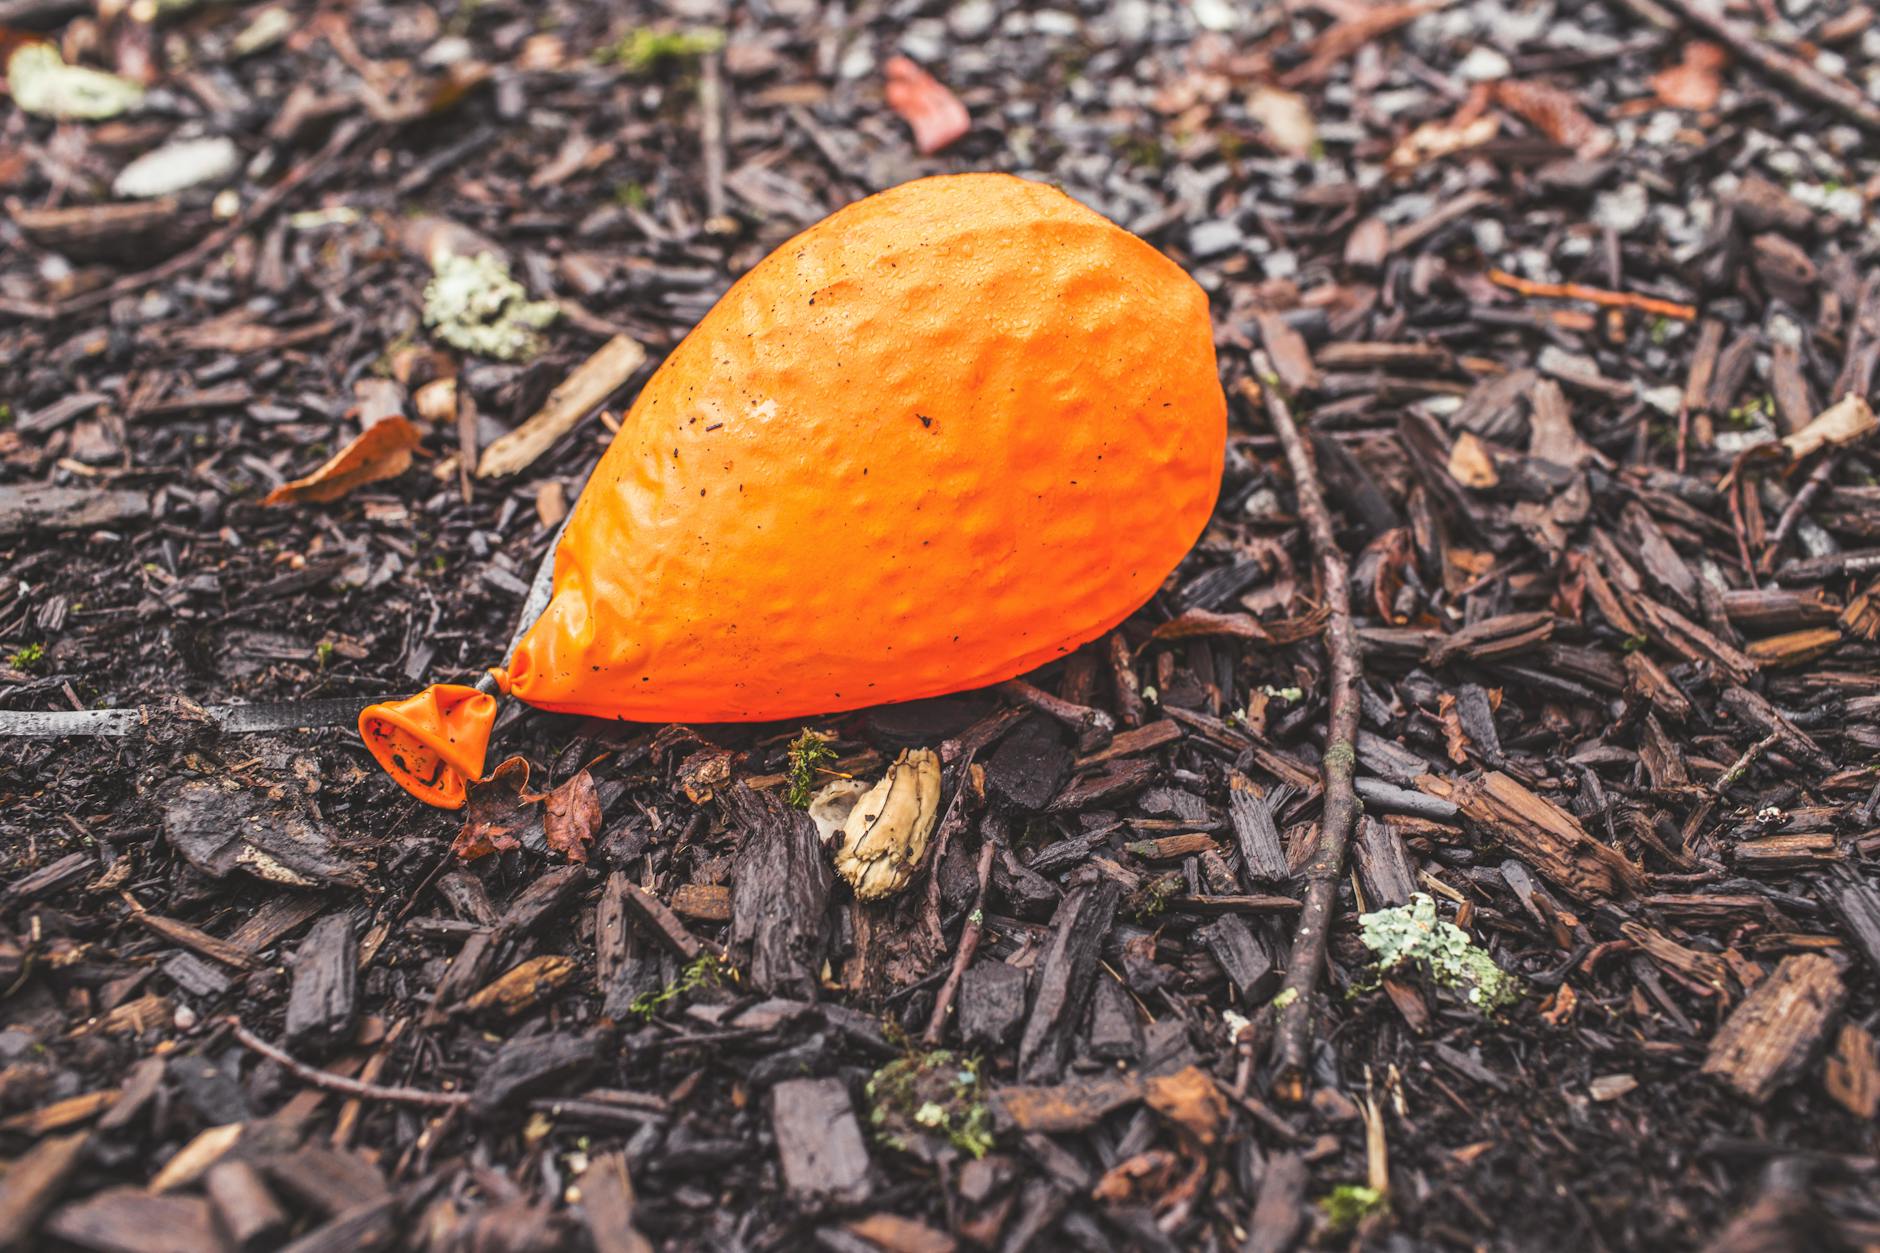 A deflated balloon is still a balloon.^[[Image](https://www.pexels.com/photo/ground-orange-balloon-deflated-4631/) is licensed under [CC0](https://www.pexels.com/creative-commons-images/)]